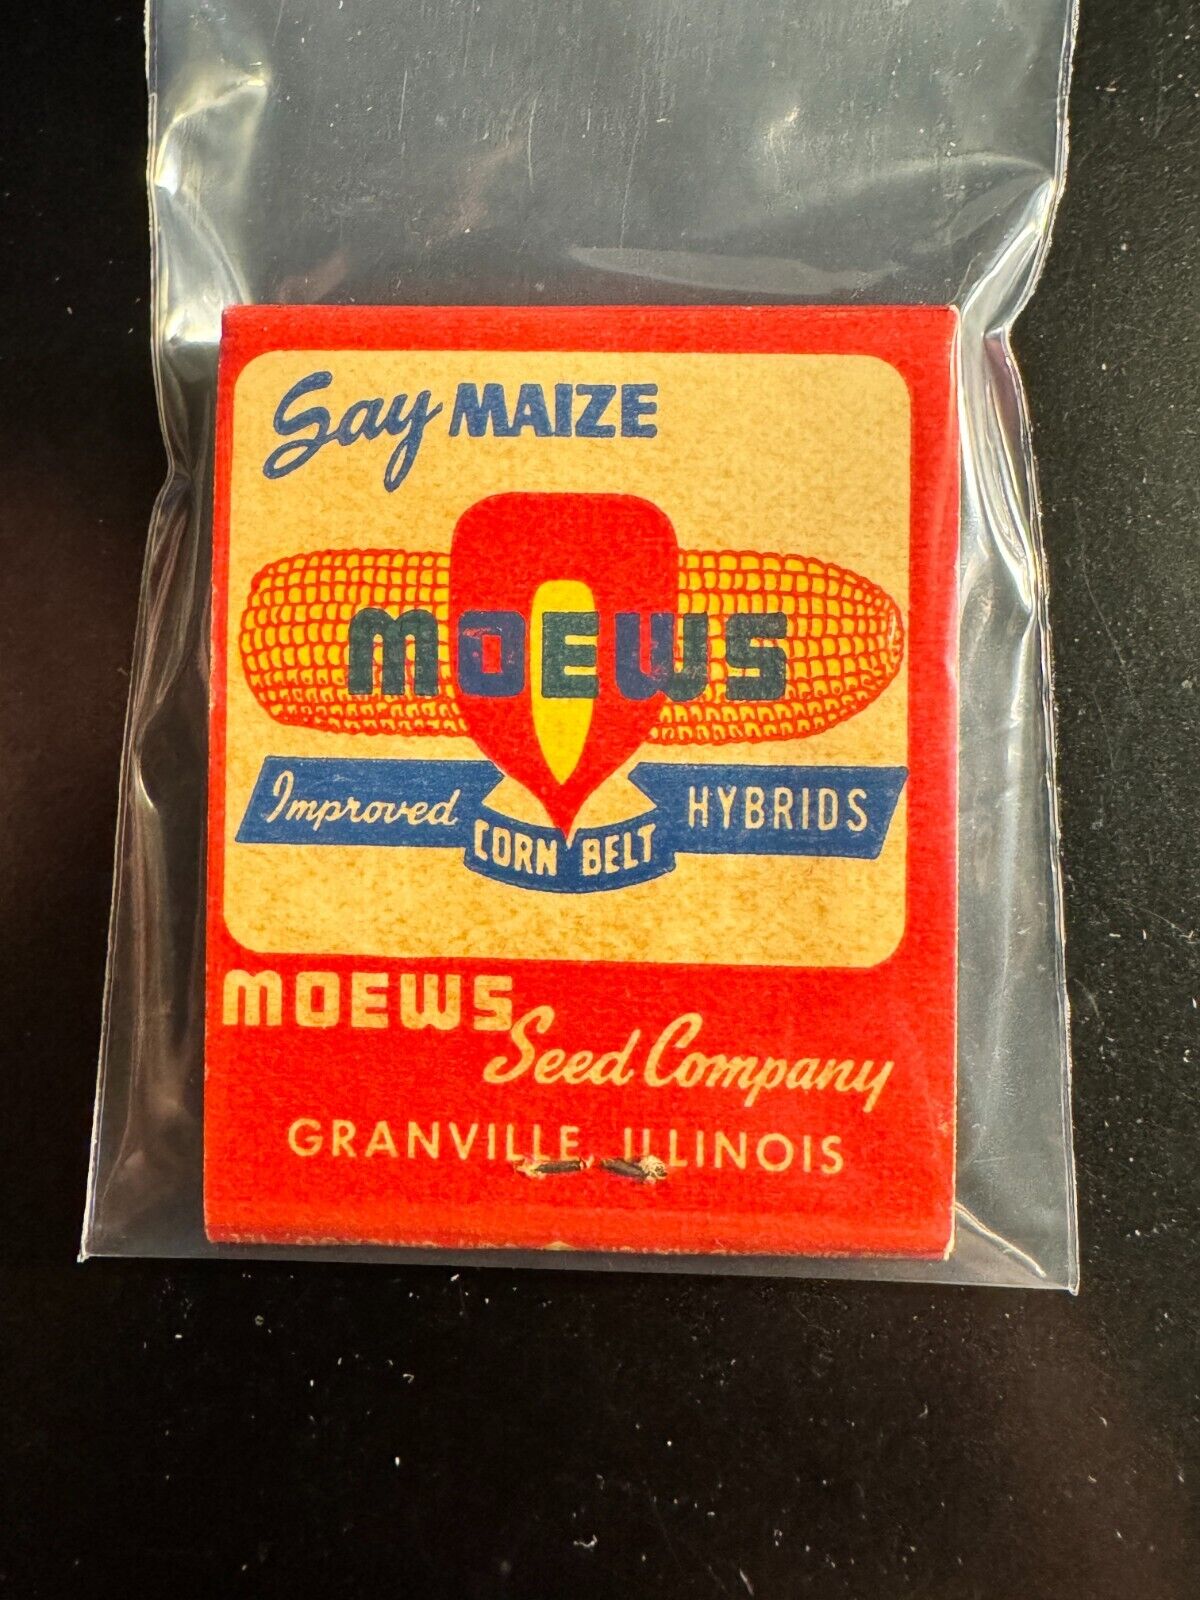 MATCHBOOK - MEOWS SEED COMPANY - SAY MAIZE - GRANVILLE, IL - UNSTRUCK